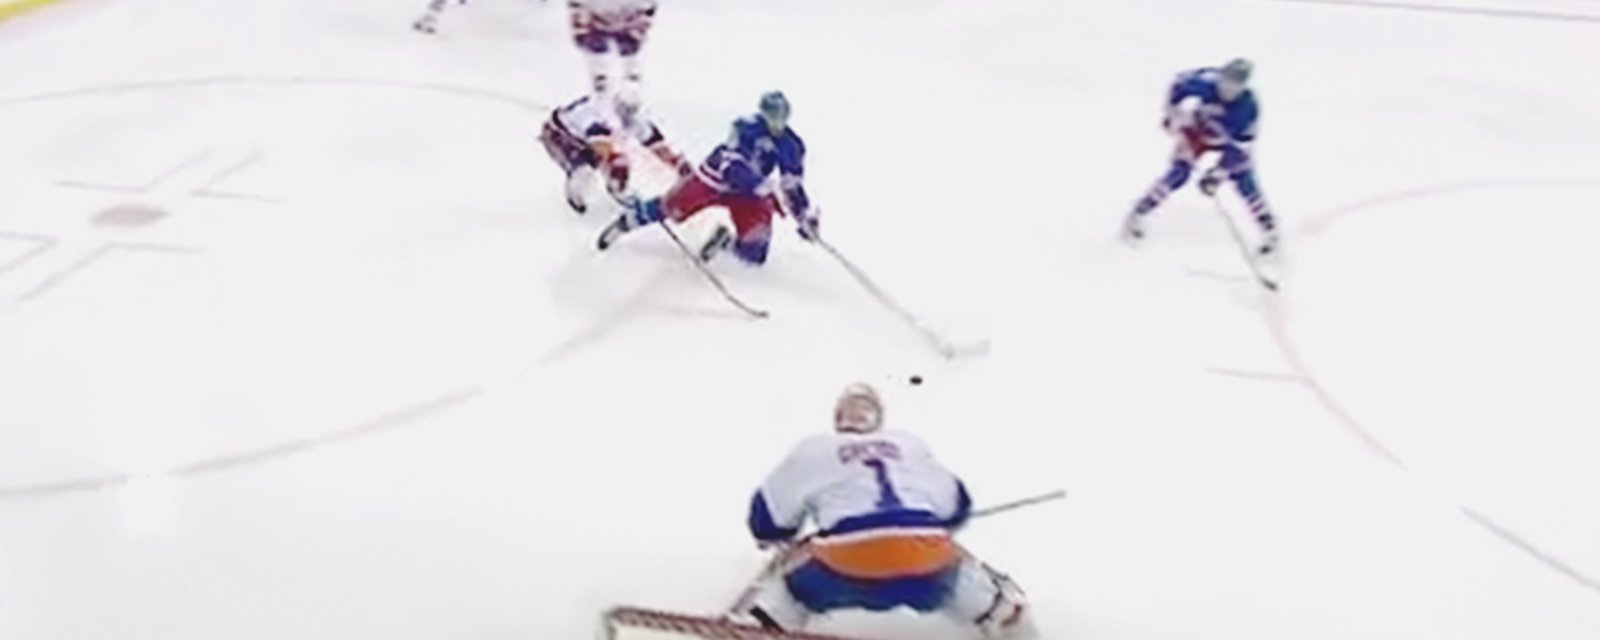 MUST SEE: Goal of the Night - Rick Nash 